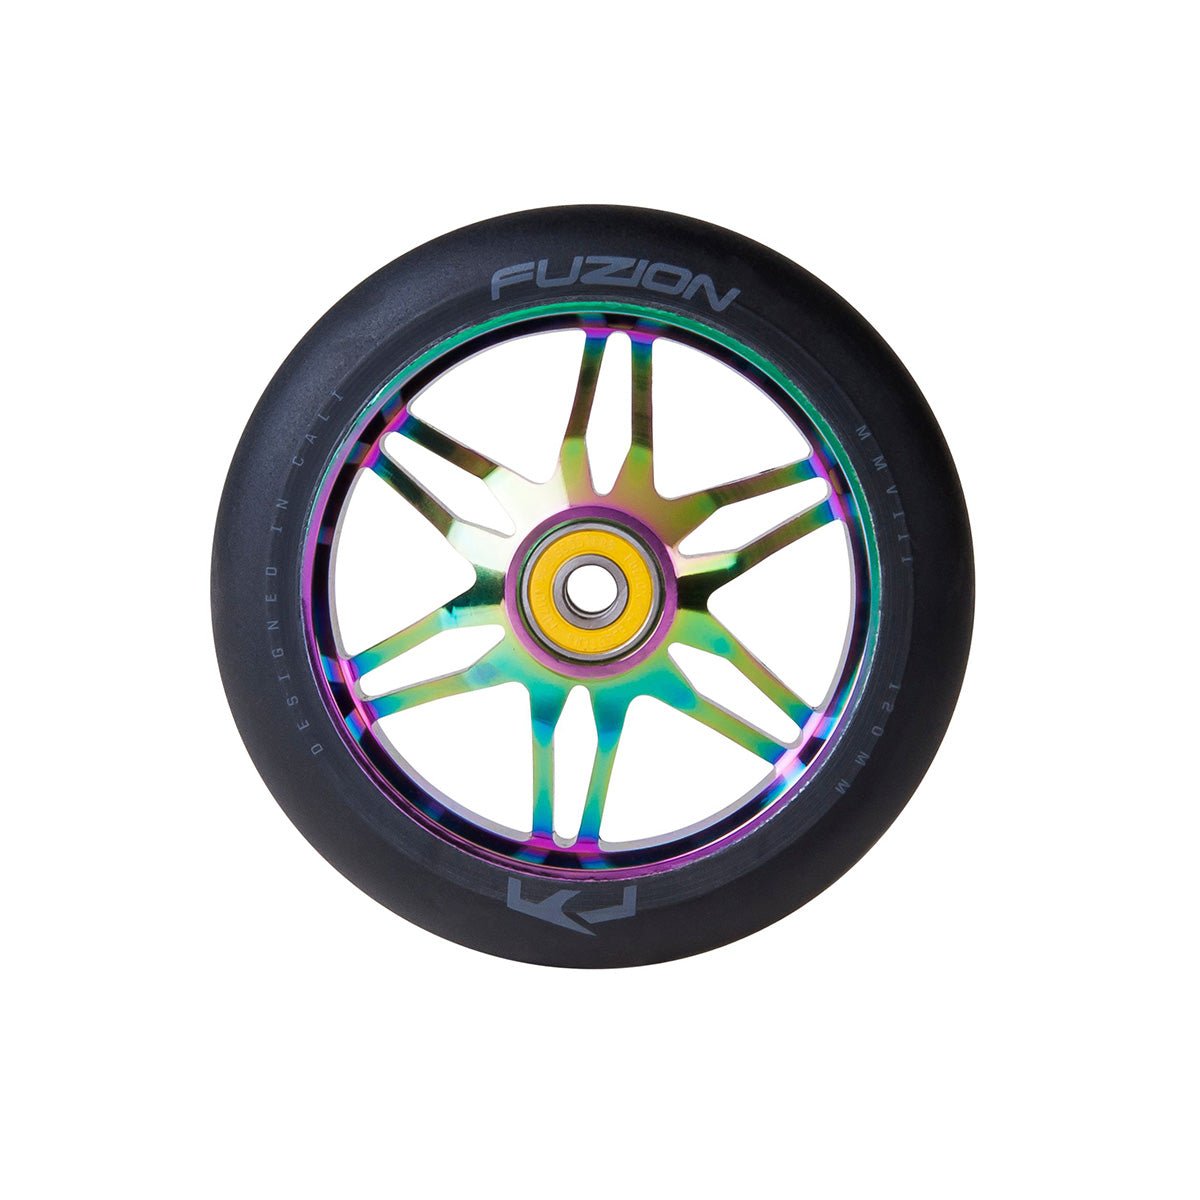 Fuzion Ace Wheels - Riding Scooters - Bland Pro Shop